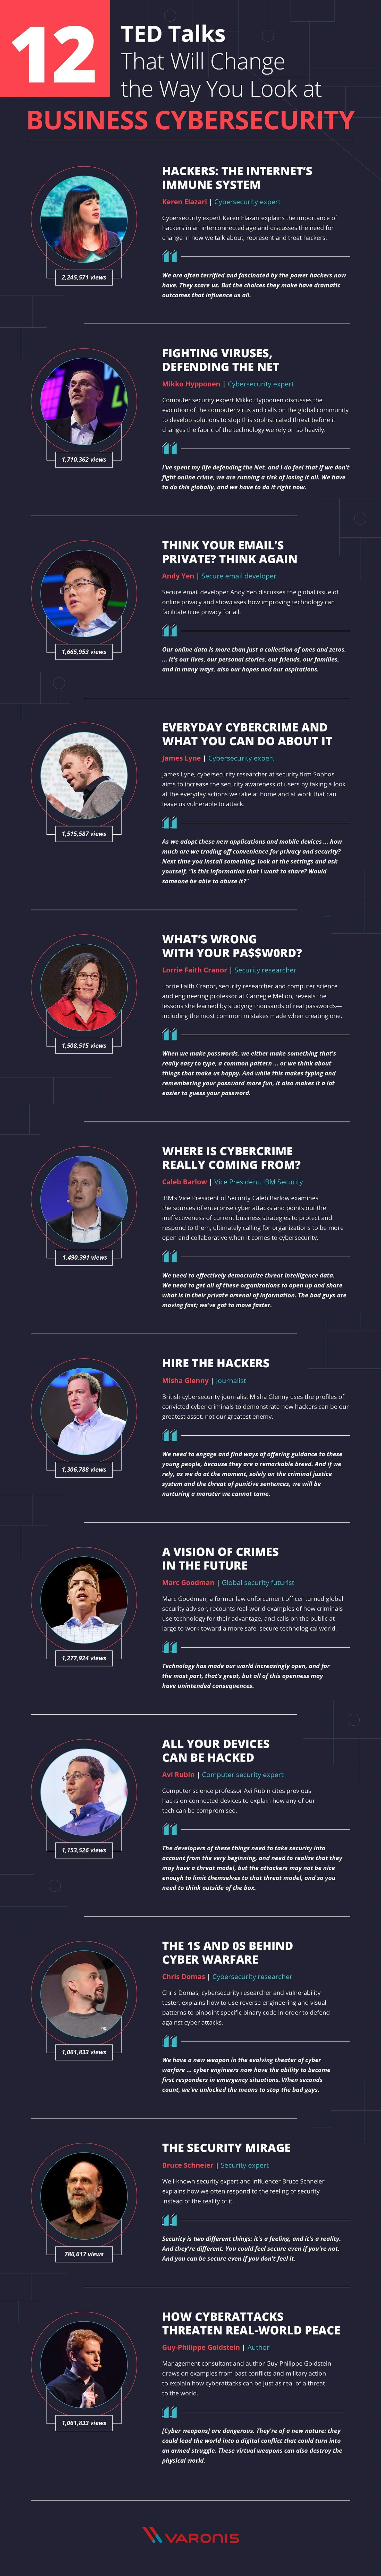 Infographic describing 12 TED talks with compelling views on business cybersecurity